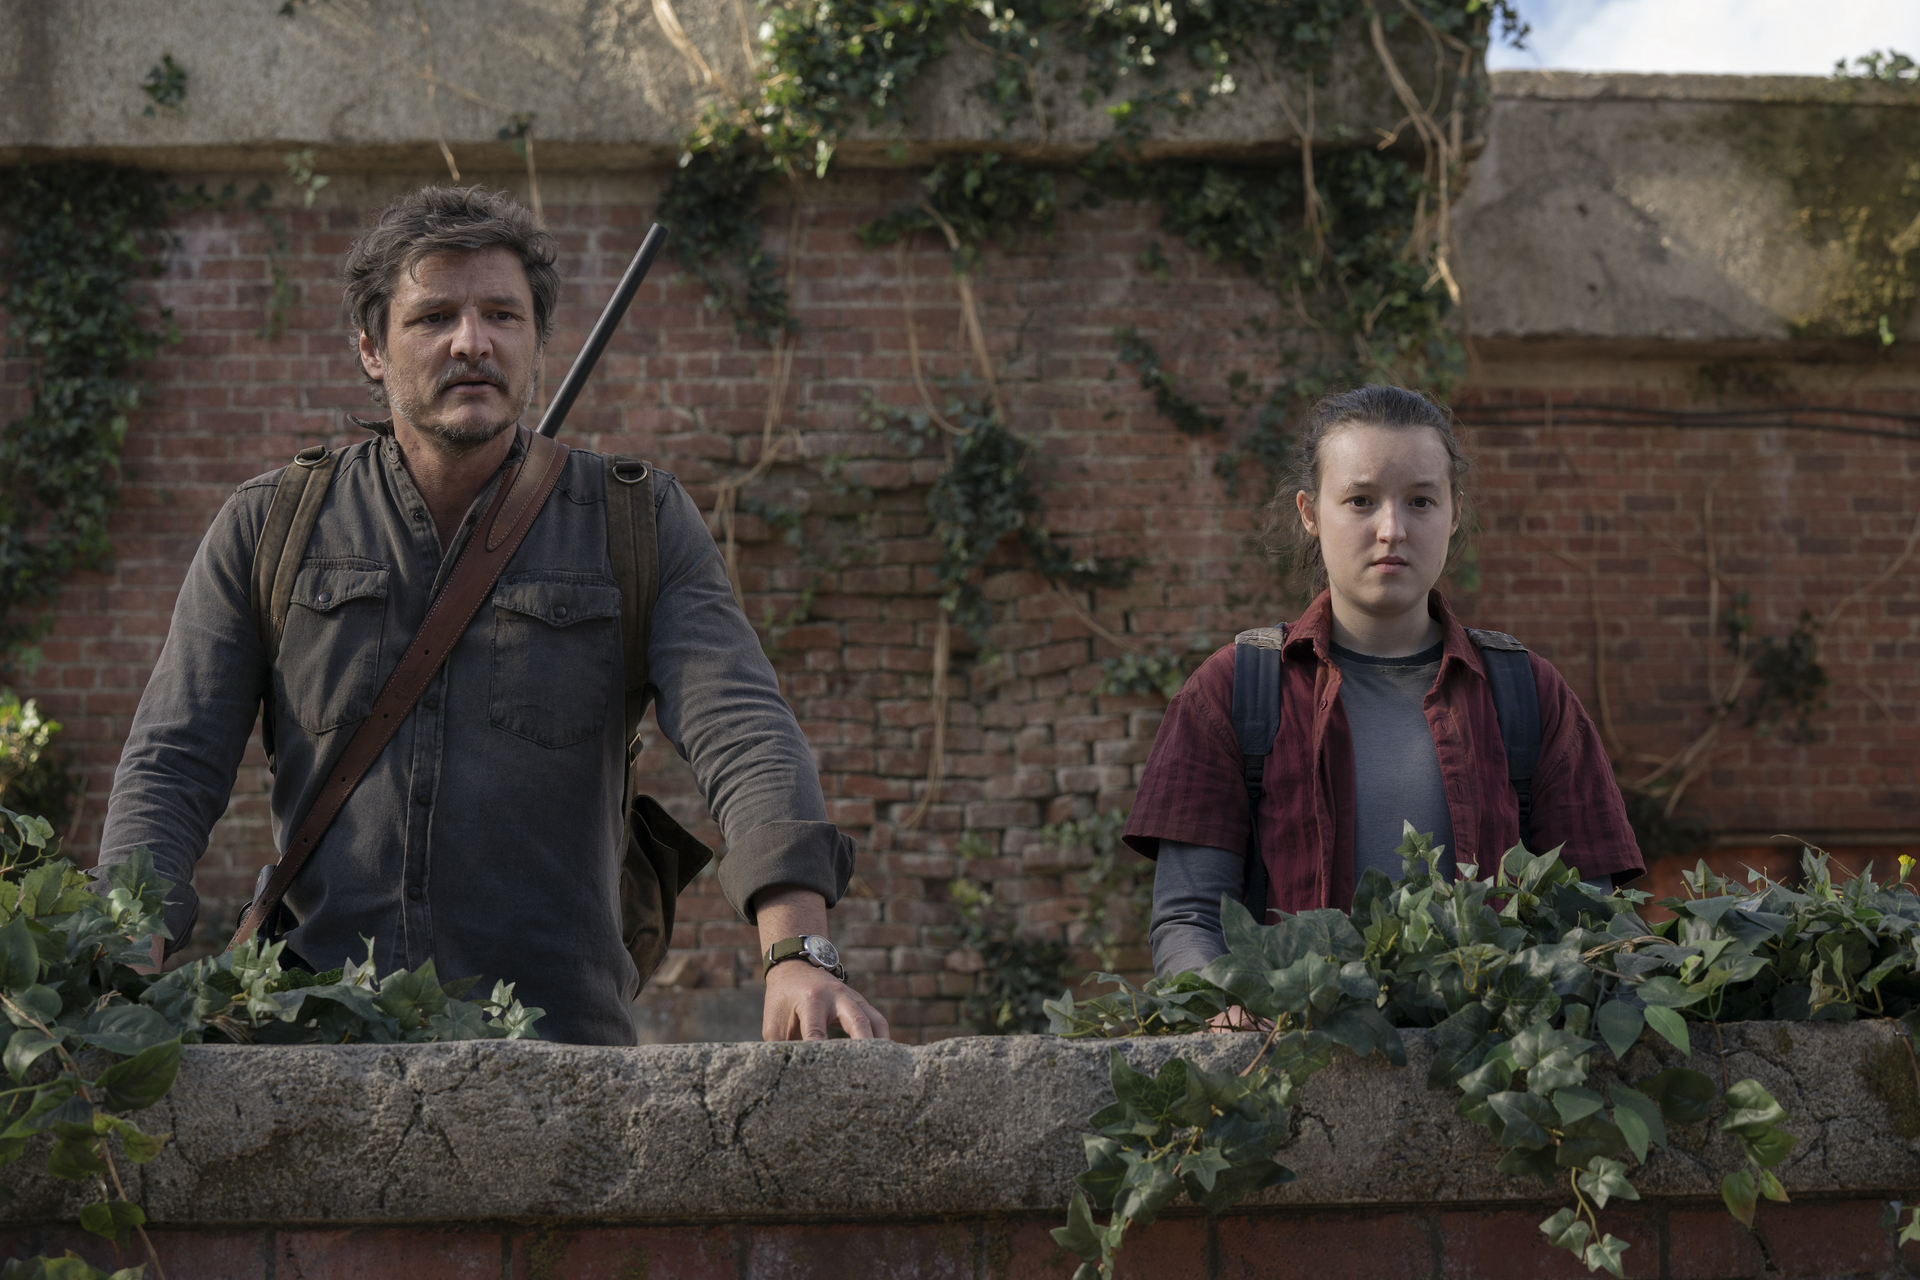 From left to right: Joel (played by Pedro Pascal) and Ellie (played by Bella Ramsey) (Liane Hentscher/HBO)